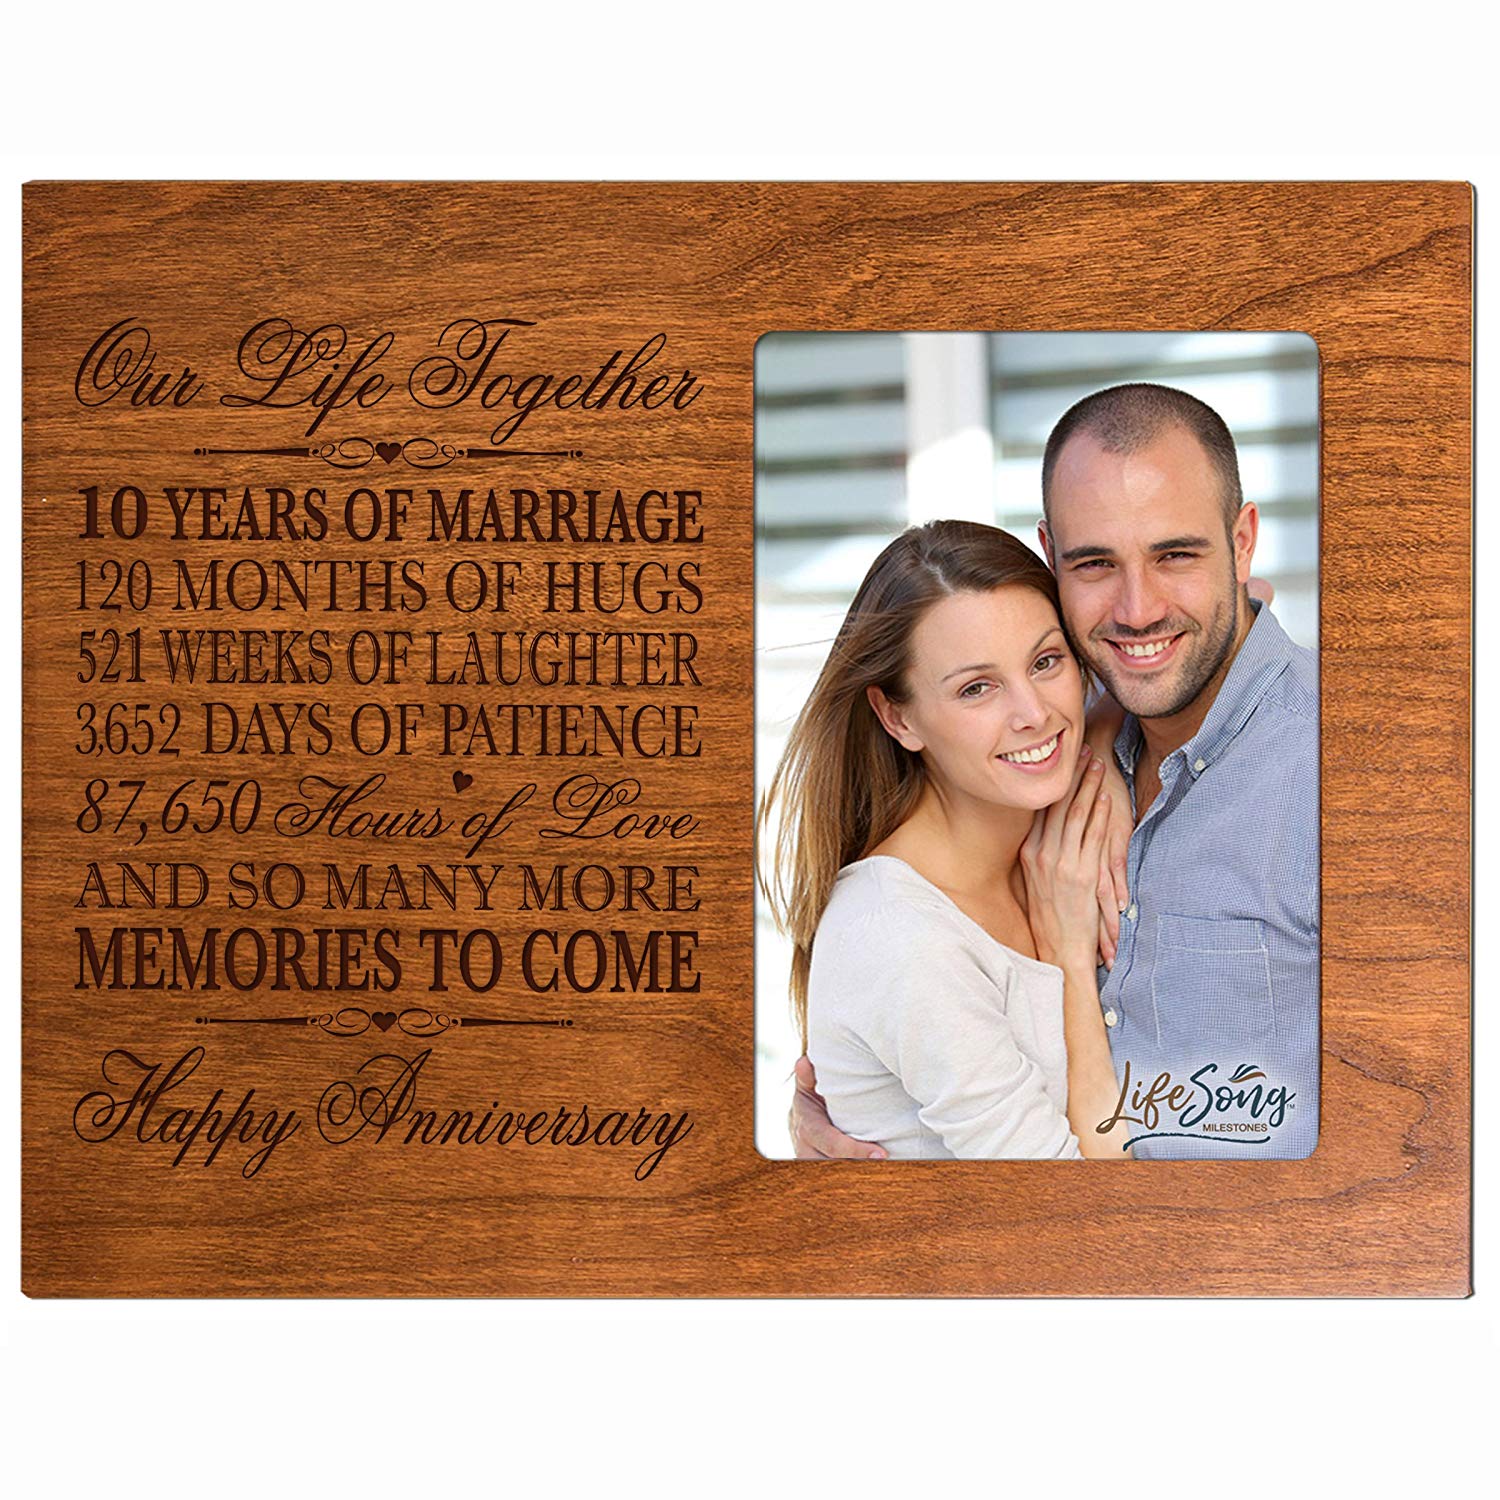 Personalized Couples 10th Wedding Anniversary Picture Frame Home Decorations - More Memories To Come - LifeSong Milestones